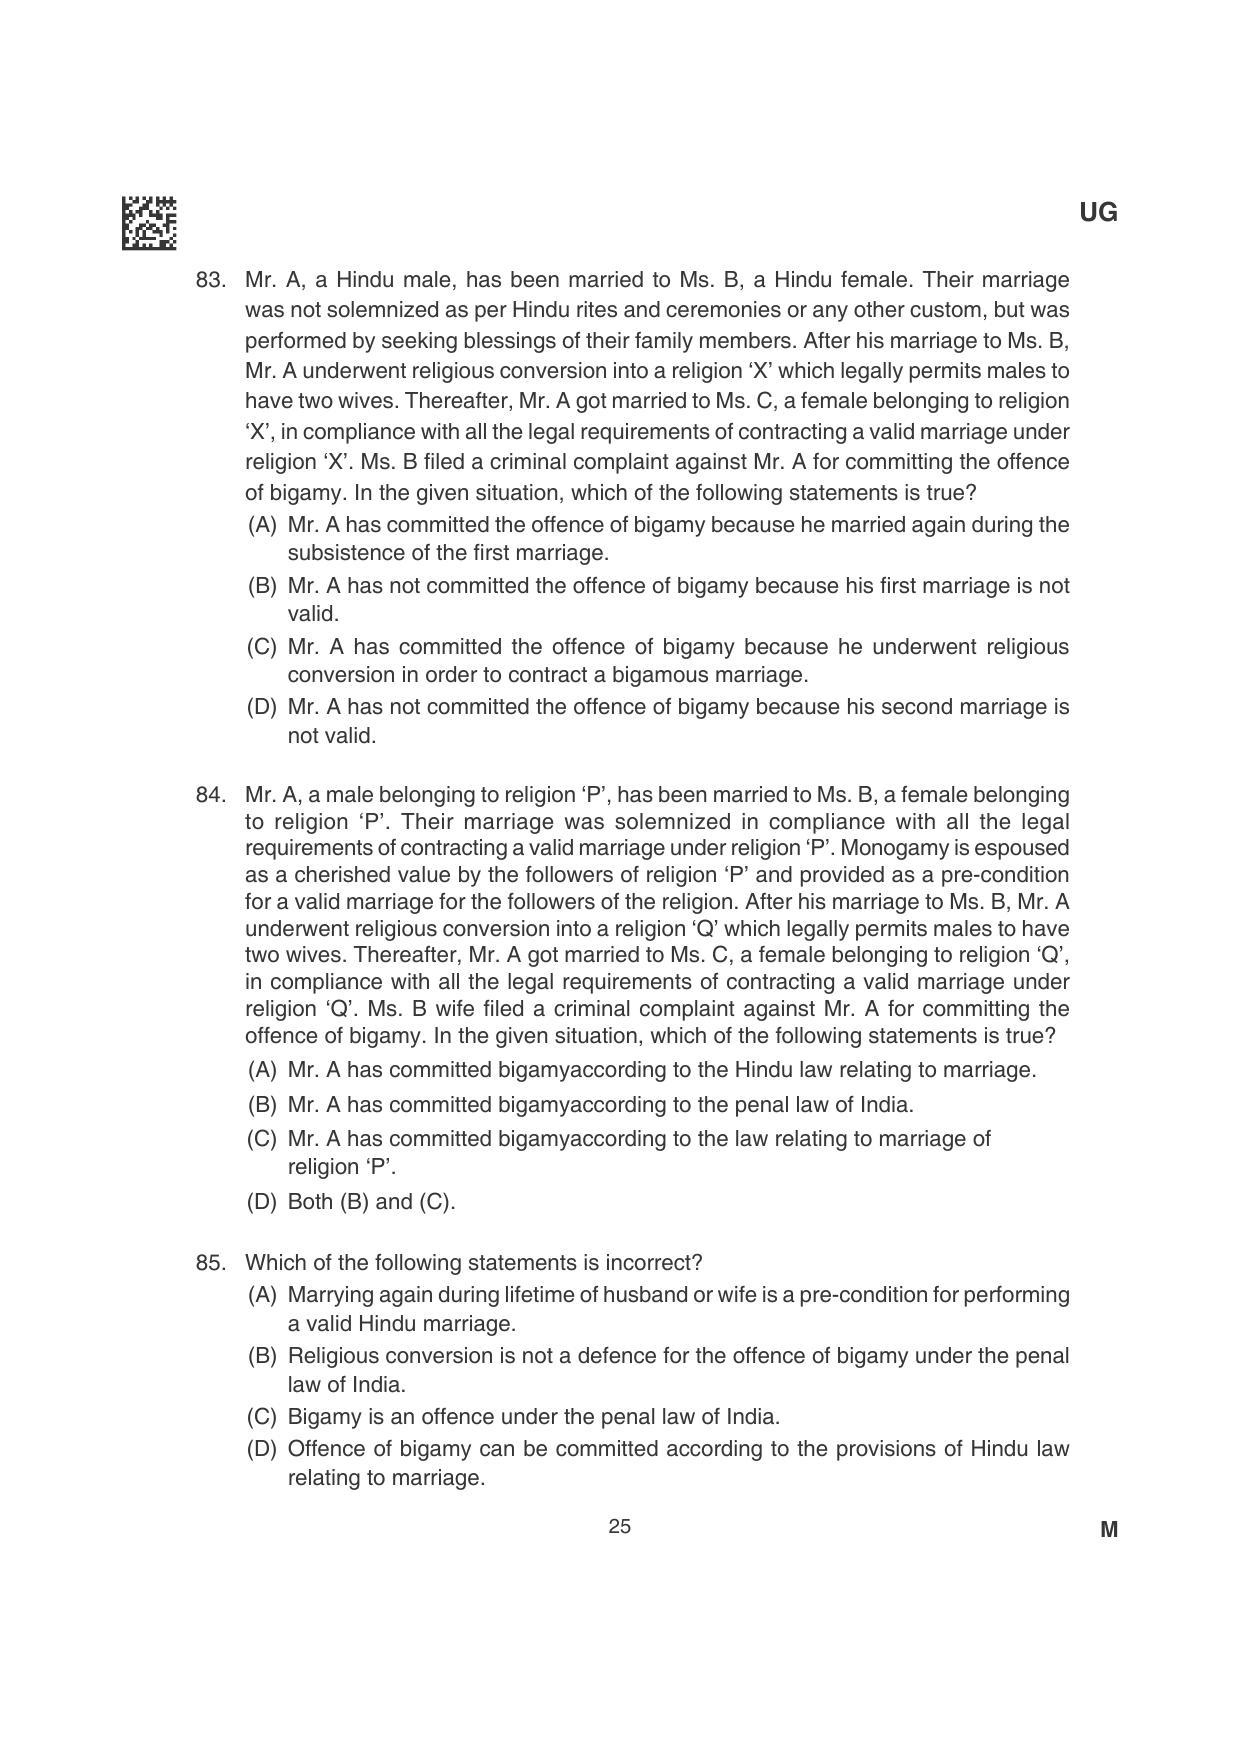 CLAT 2022 UG Question Papers - Page 25